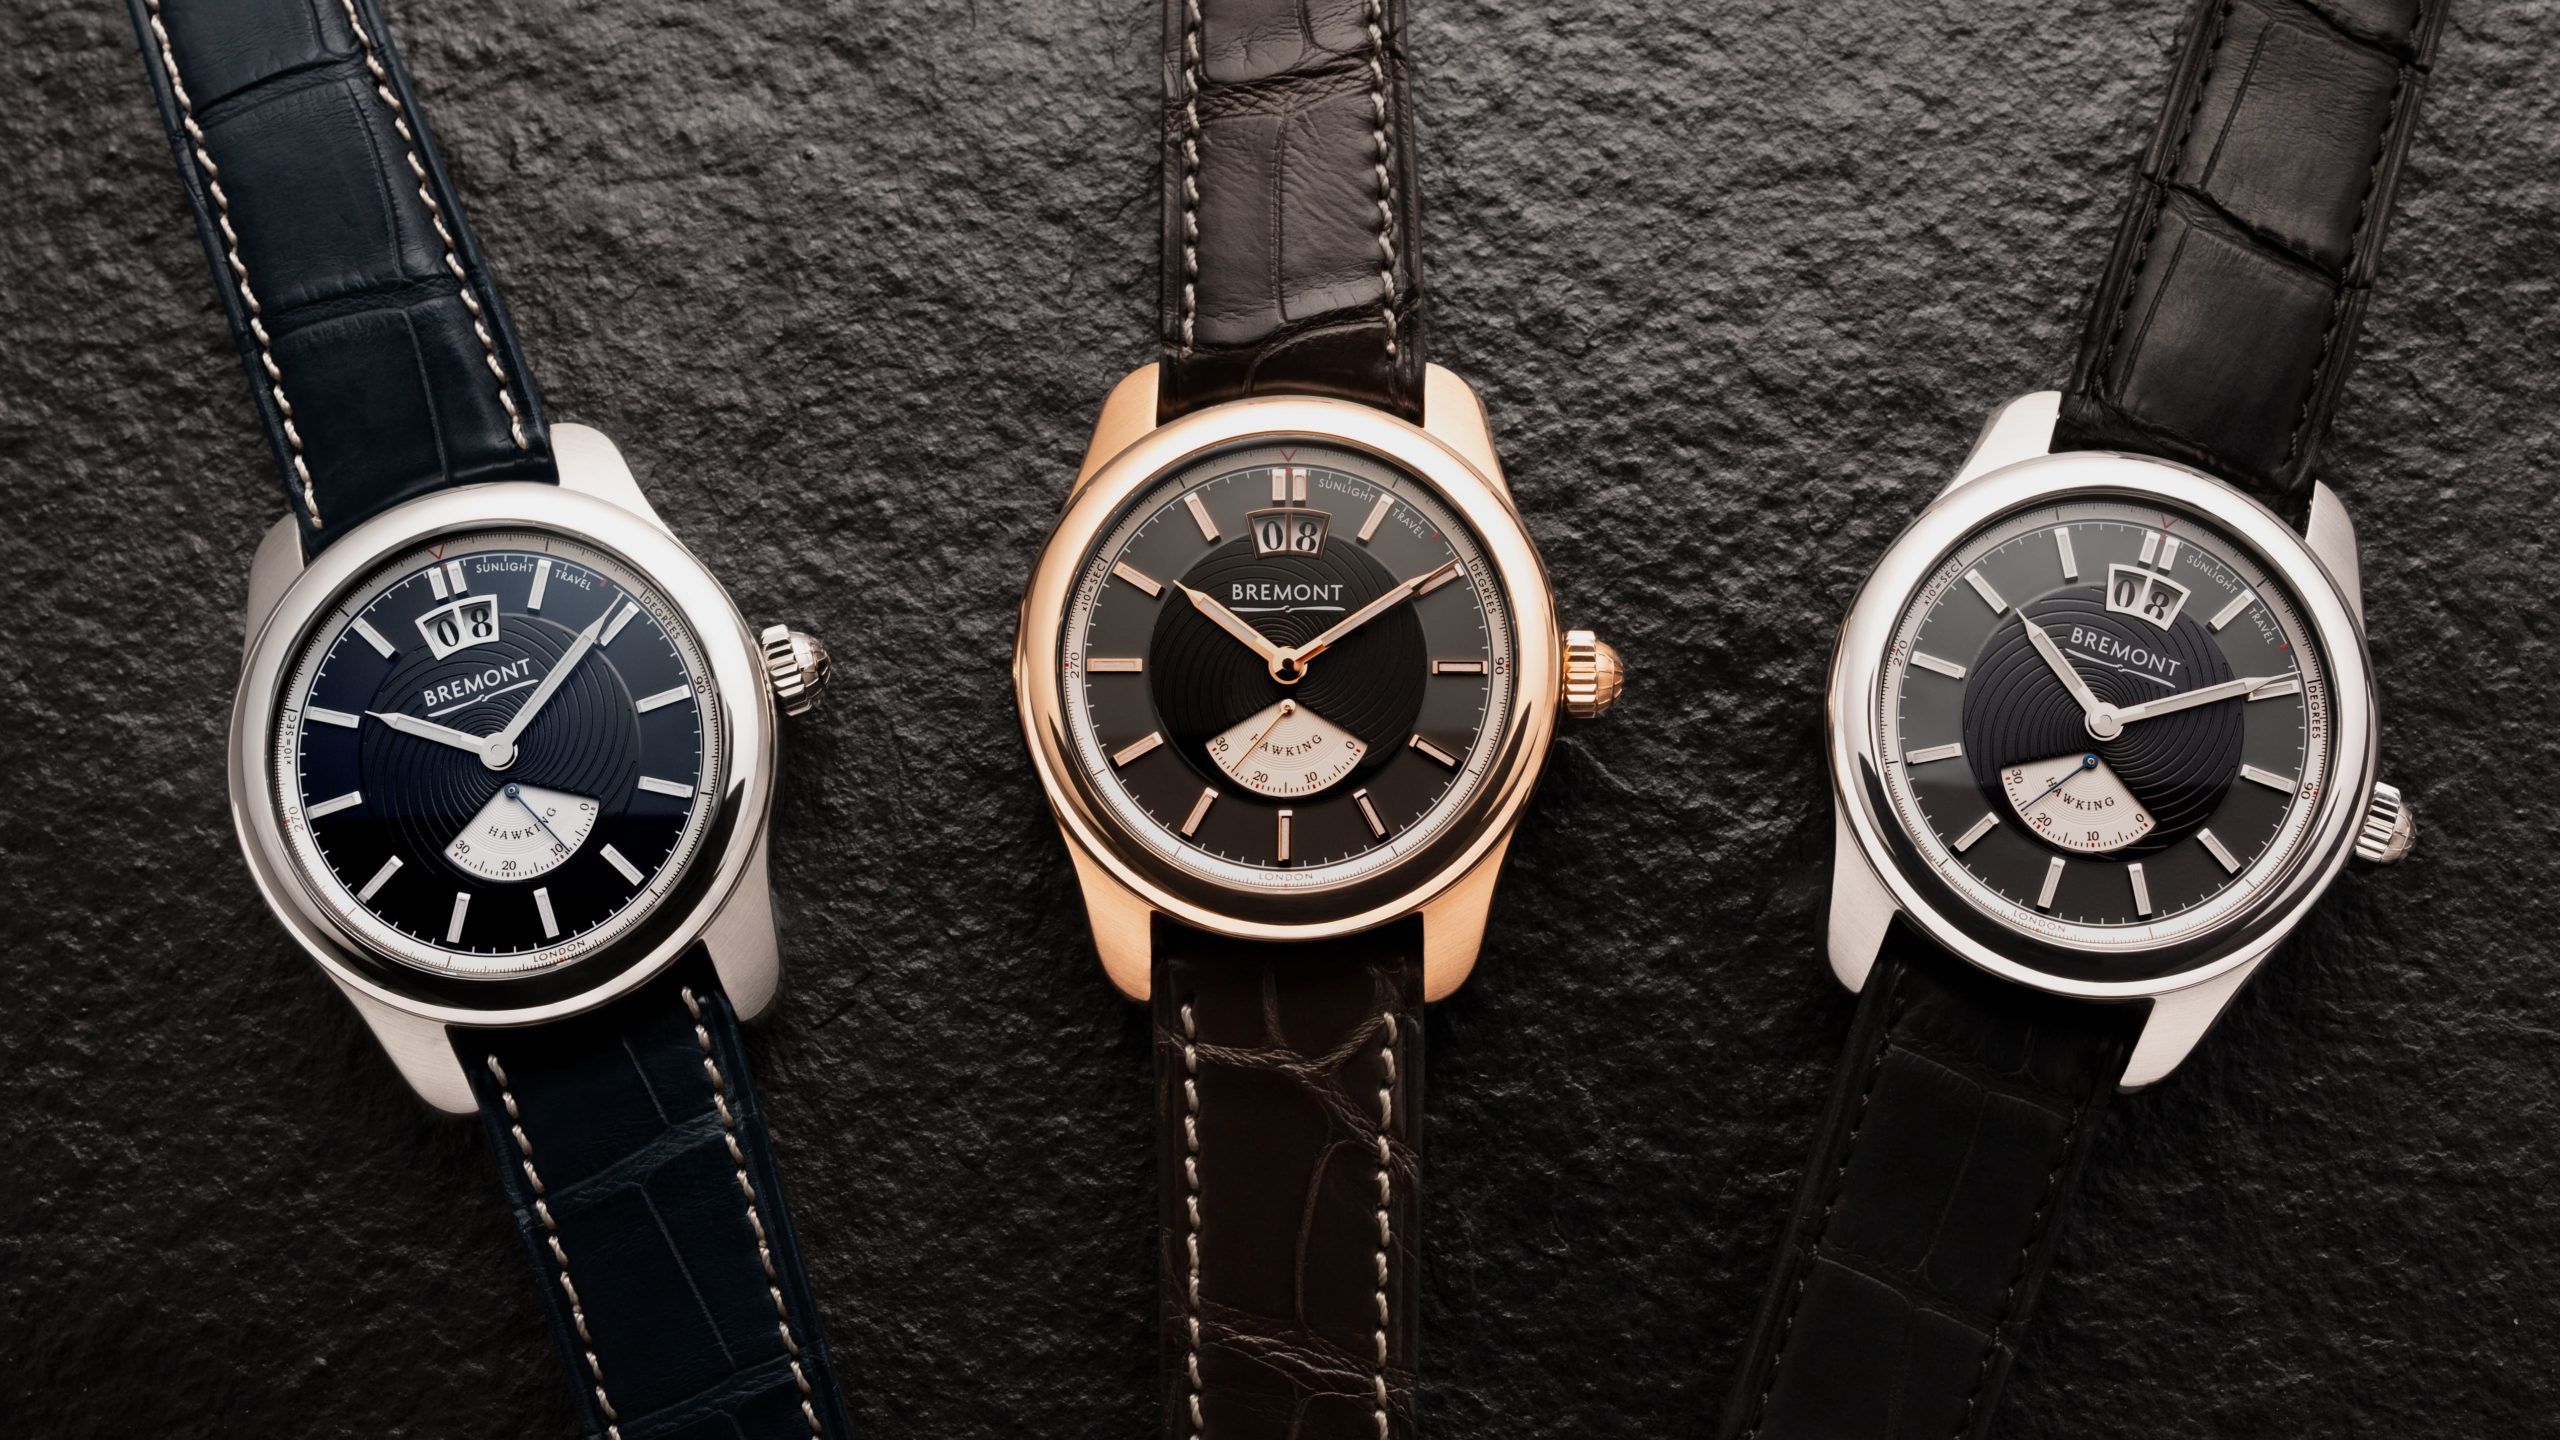 Bremont launches limited Hawking collection celebrating the scientist